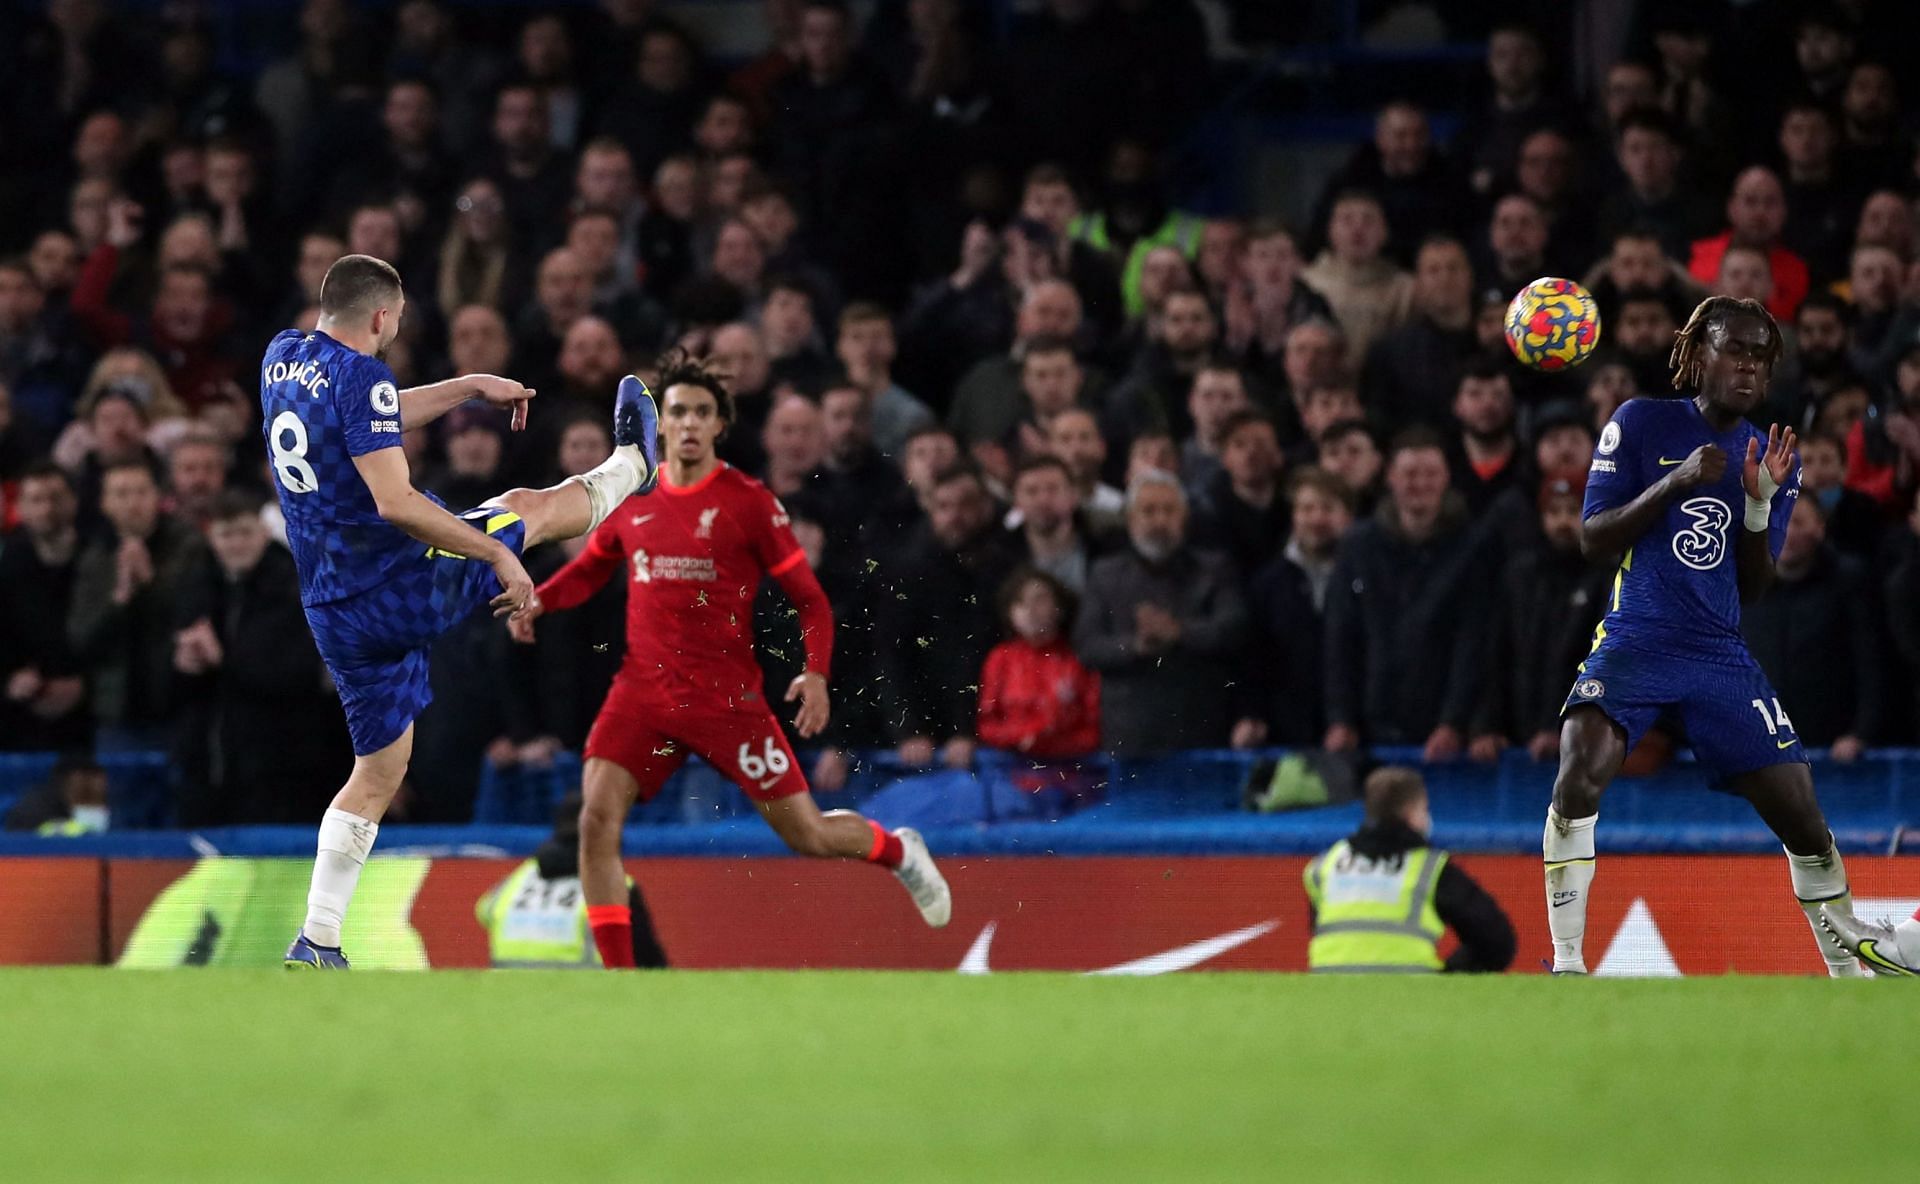 Chelsea and Liverpool played out an entertaining 2-2 draw in the Premier League.